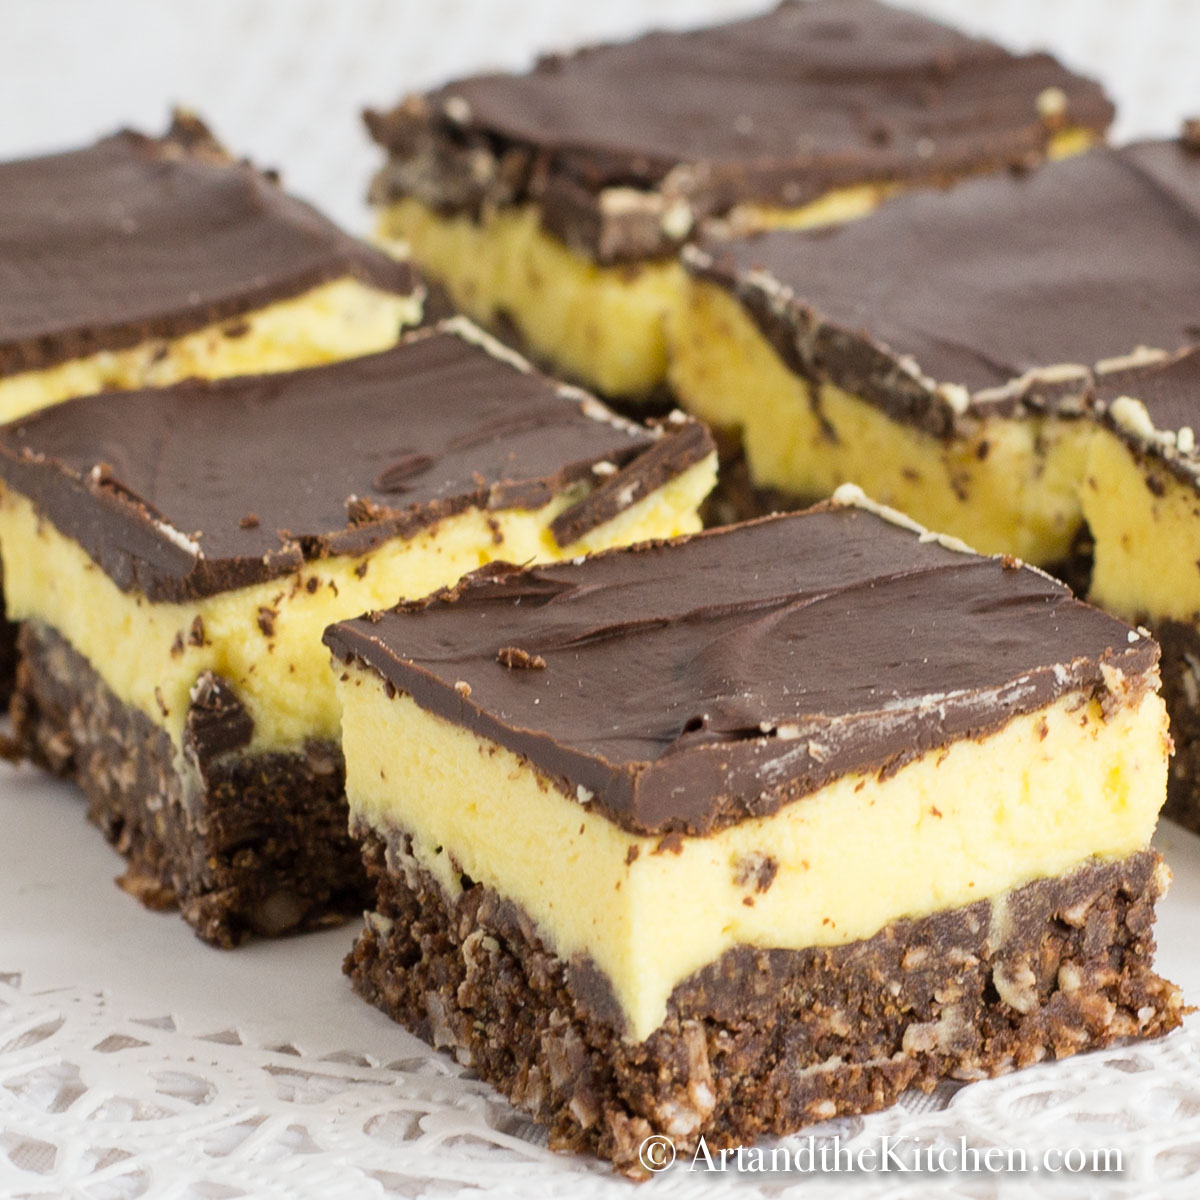 Rows of cut up squares that have layers of chocolate, yellow custard and chocolate coconut